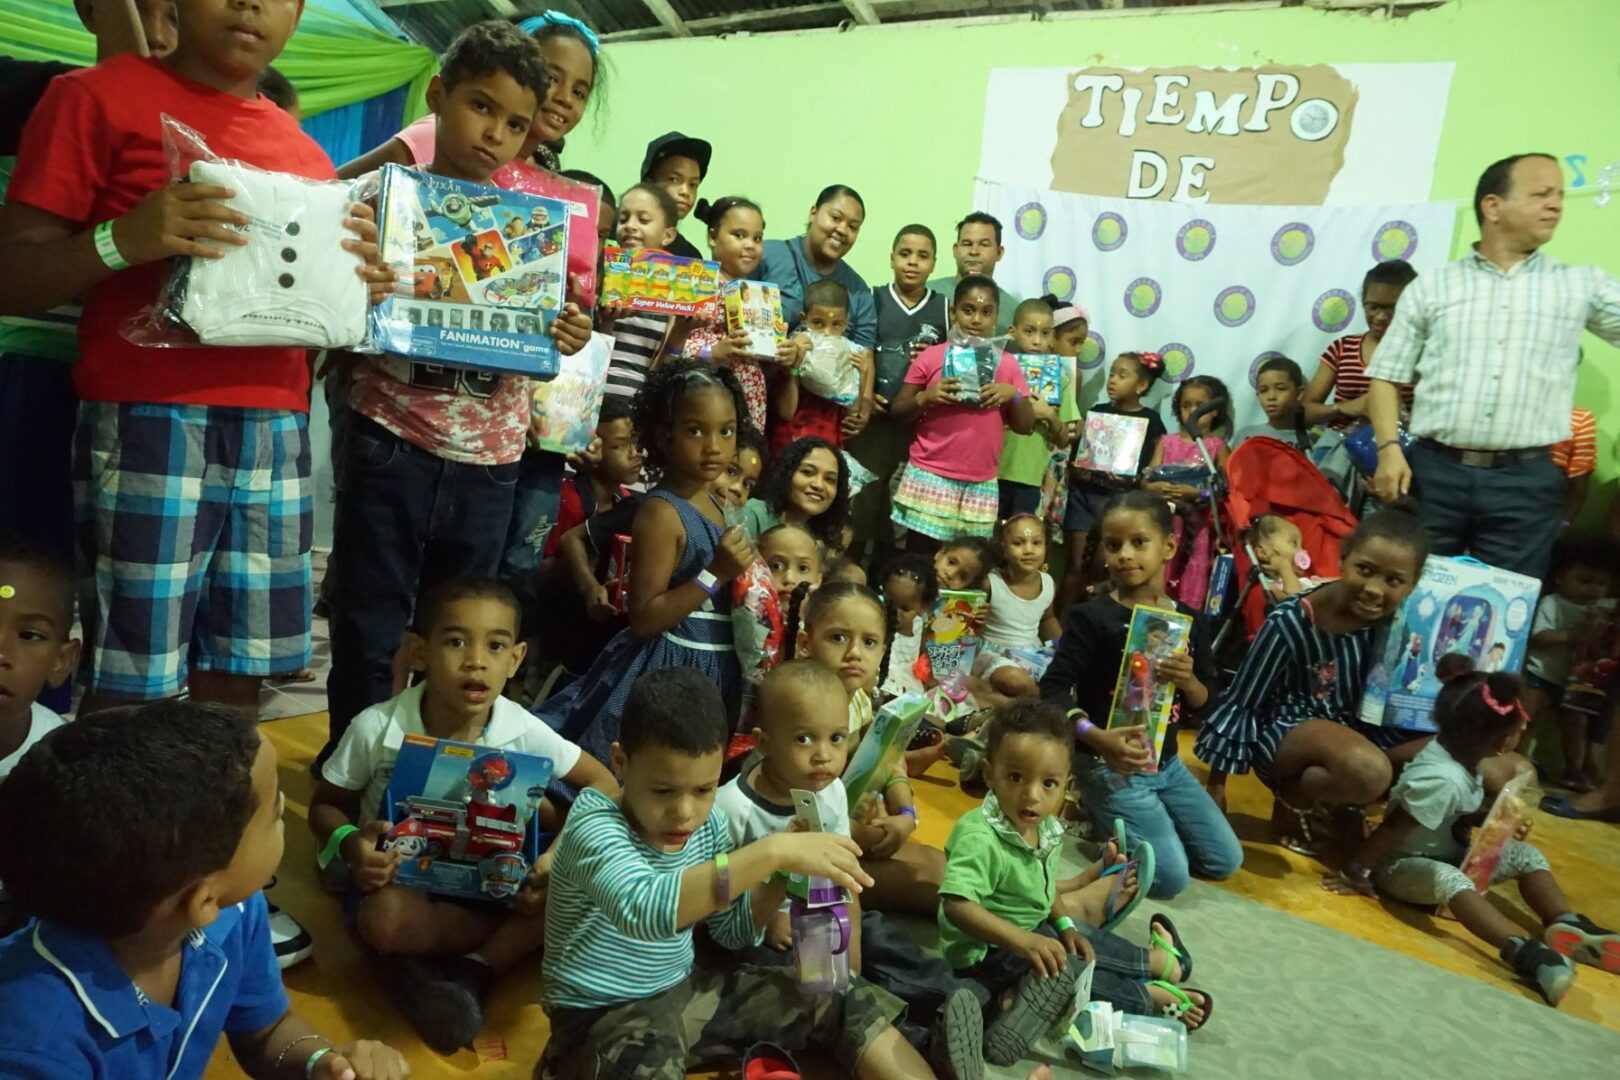 All of the children and the staff gathers in front of the room with their toys